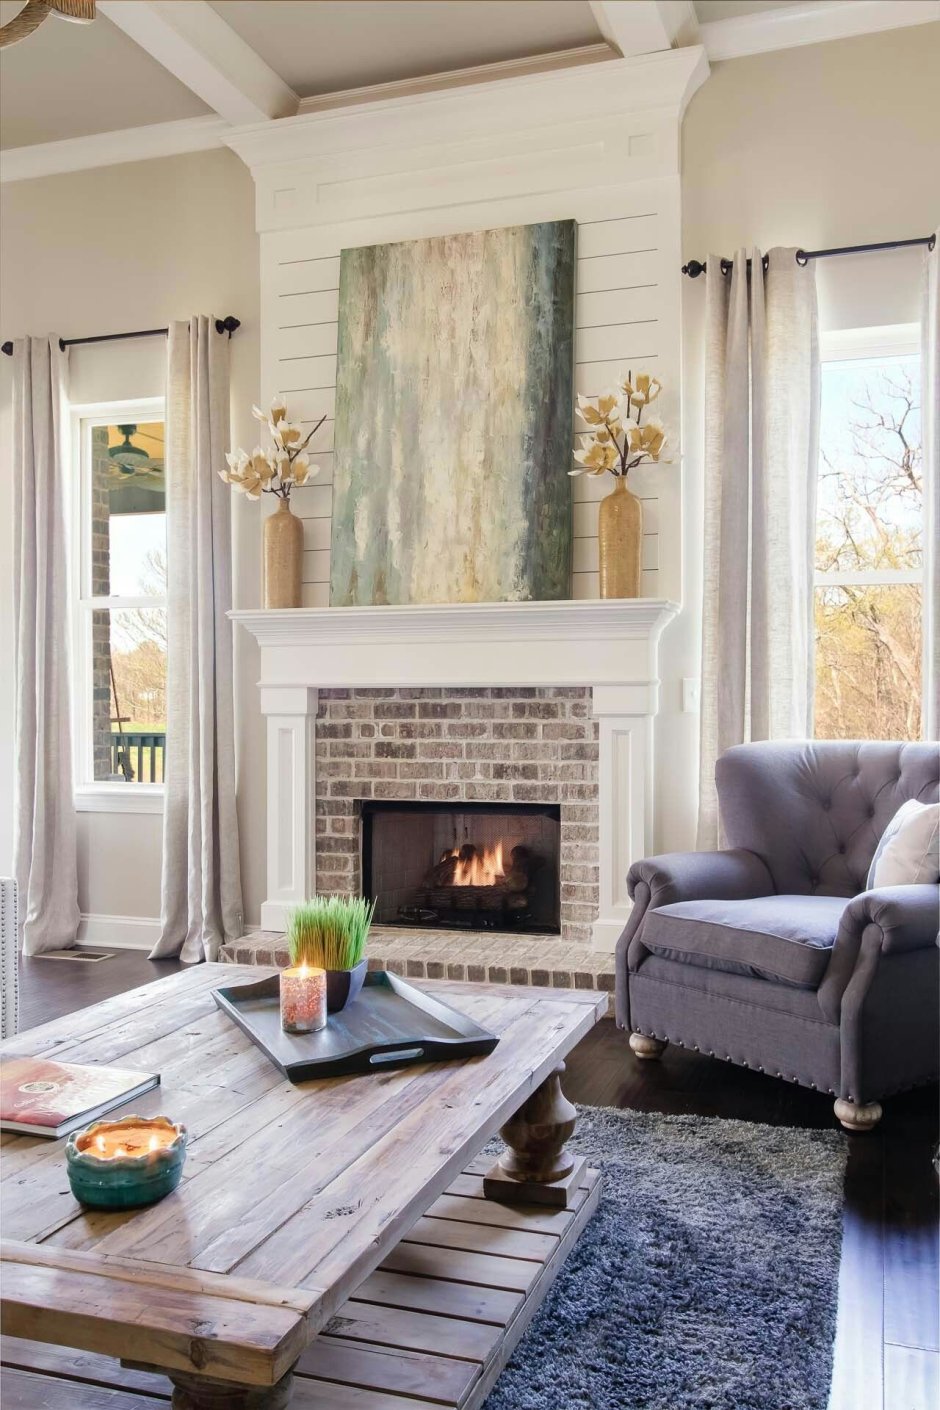 Fireplace wall with windows